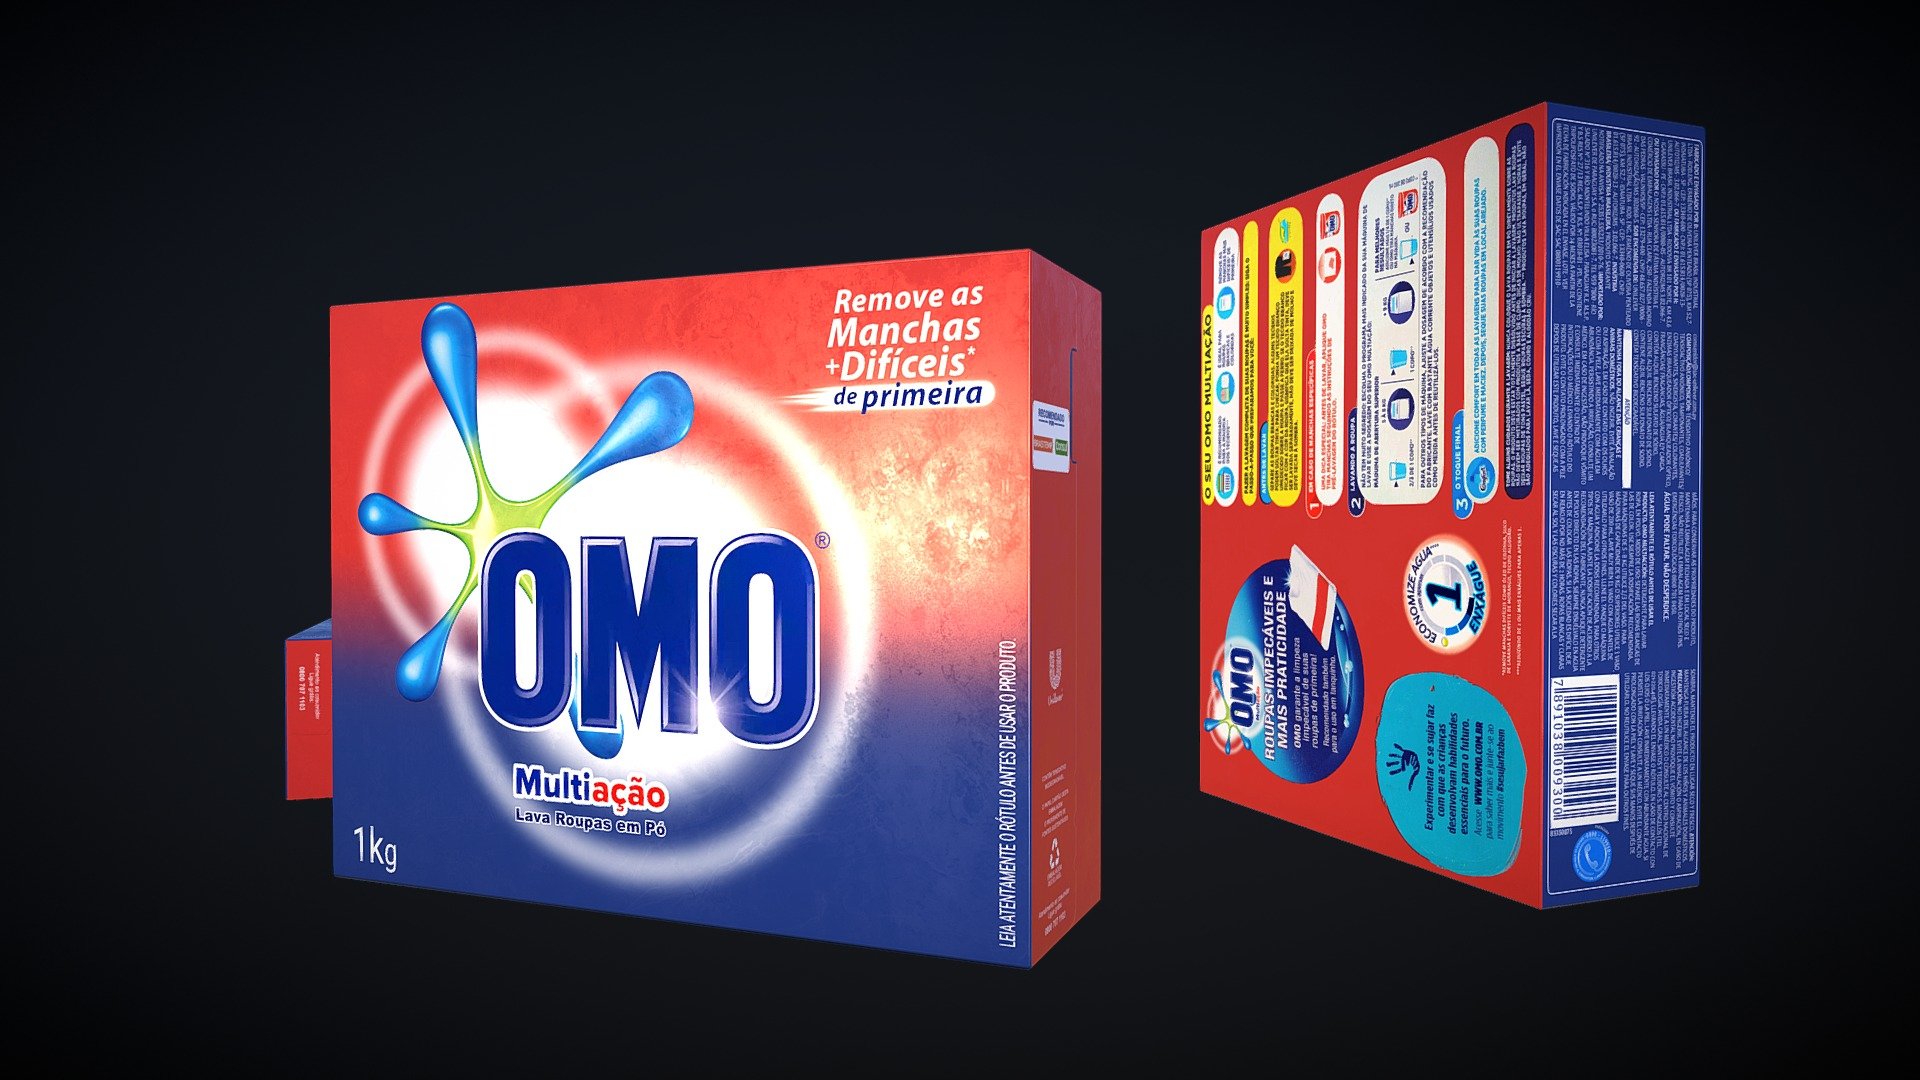 It was one of the first brands of soap powder in Brazil, appearing in the national market after the brand Rinso, also manufactured by Unilever, which was its competitor for many years.

44 TRIS Game ready with PBR Texture. Maps included: 

2048X2048 Albedo (Diffuse), Normal, Roughness, Specular, Metallic and Ambient Occlusion - OMO Multiação -  PBR Game Ready - 3D model by Rafael Ribeiro (@ribeirorafael) 3d model